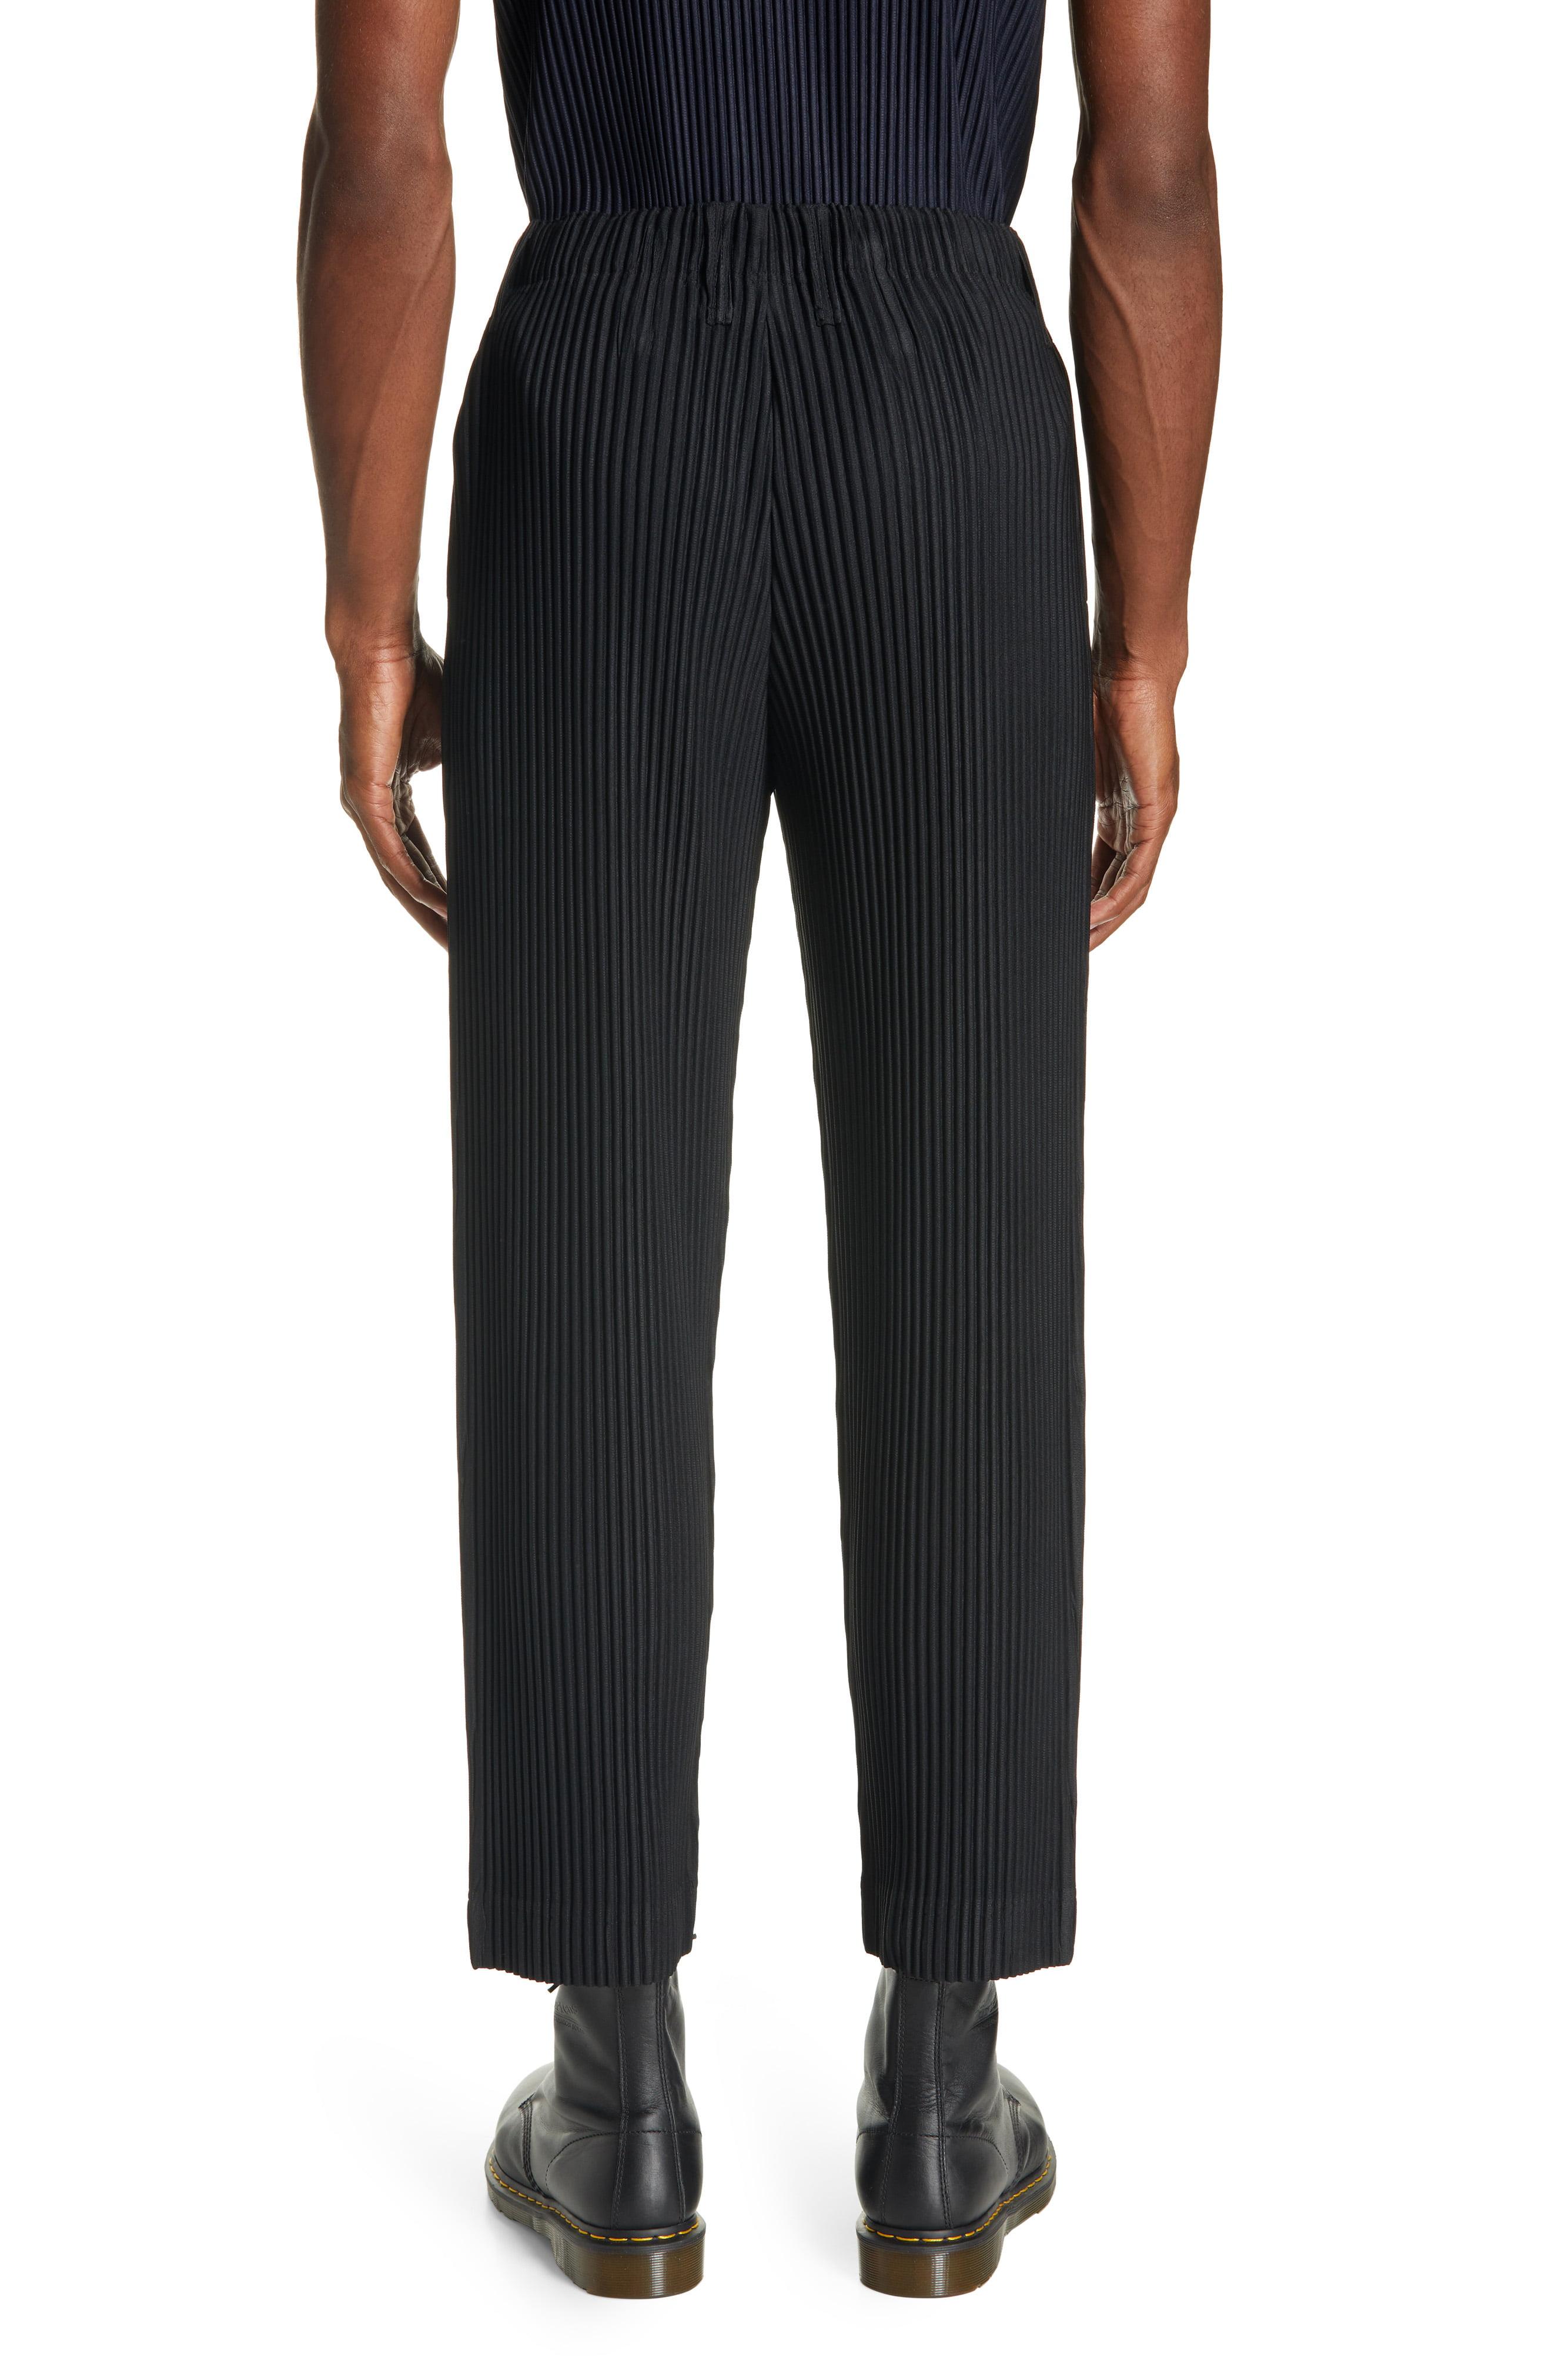 Homme Plissé Issey Miyake Pleated Pants in Black for Men - Lyst